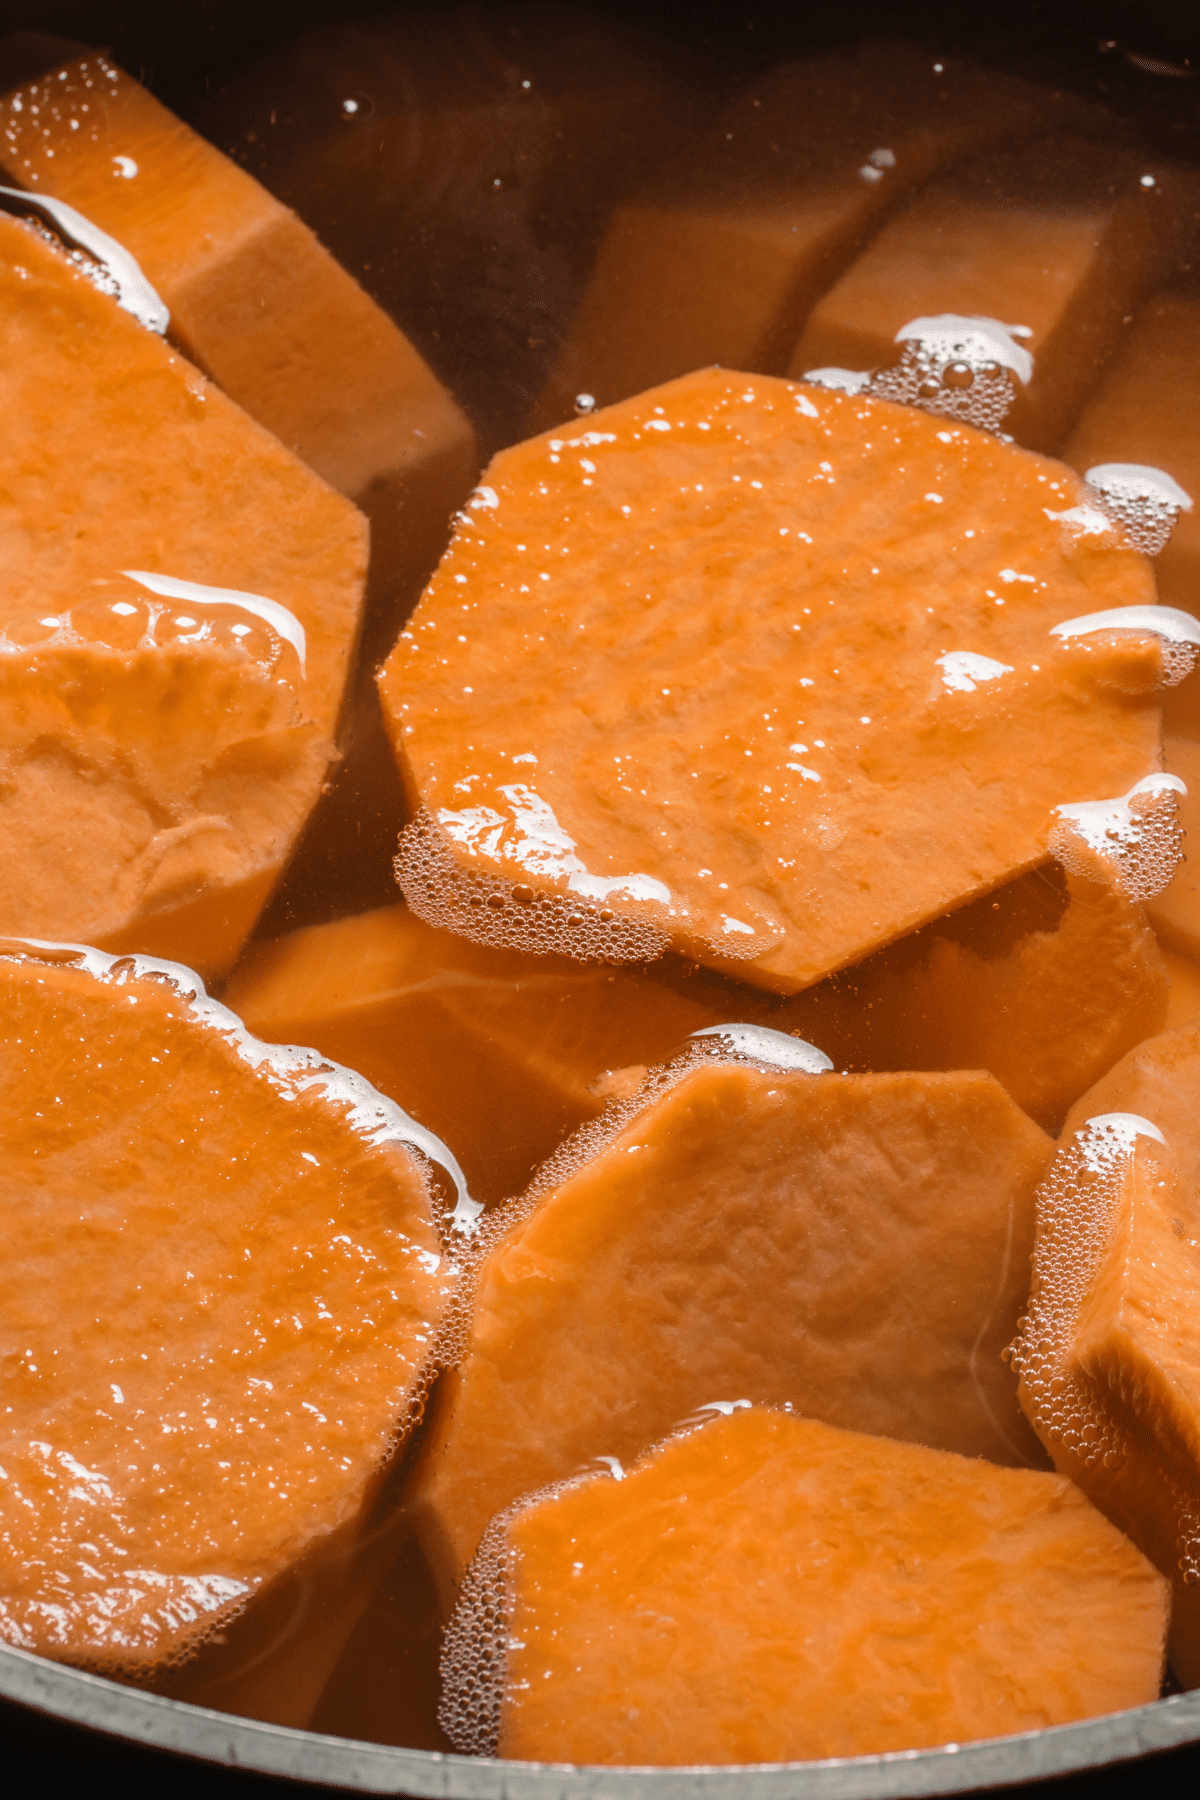 Sliced yams cooking in a pot of boiling water.